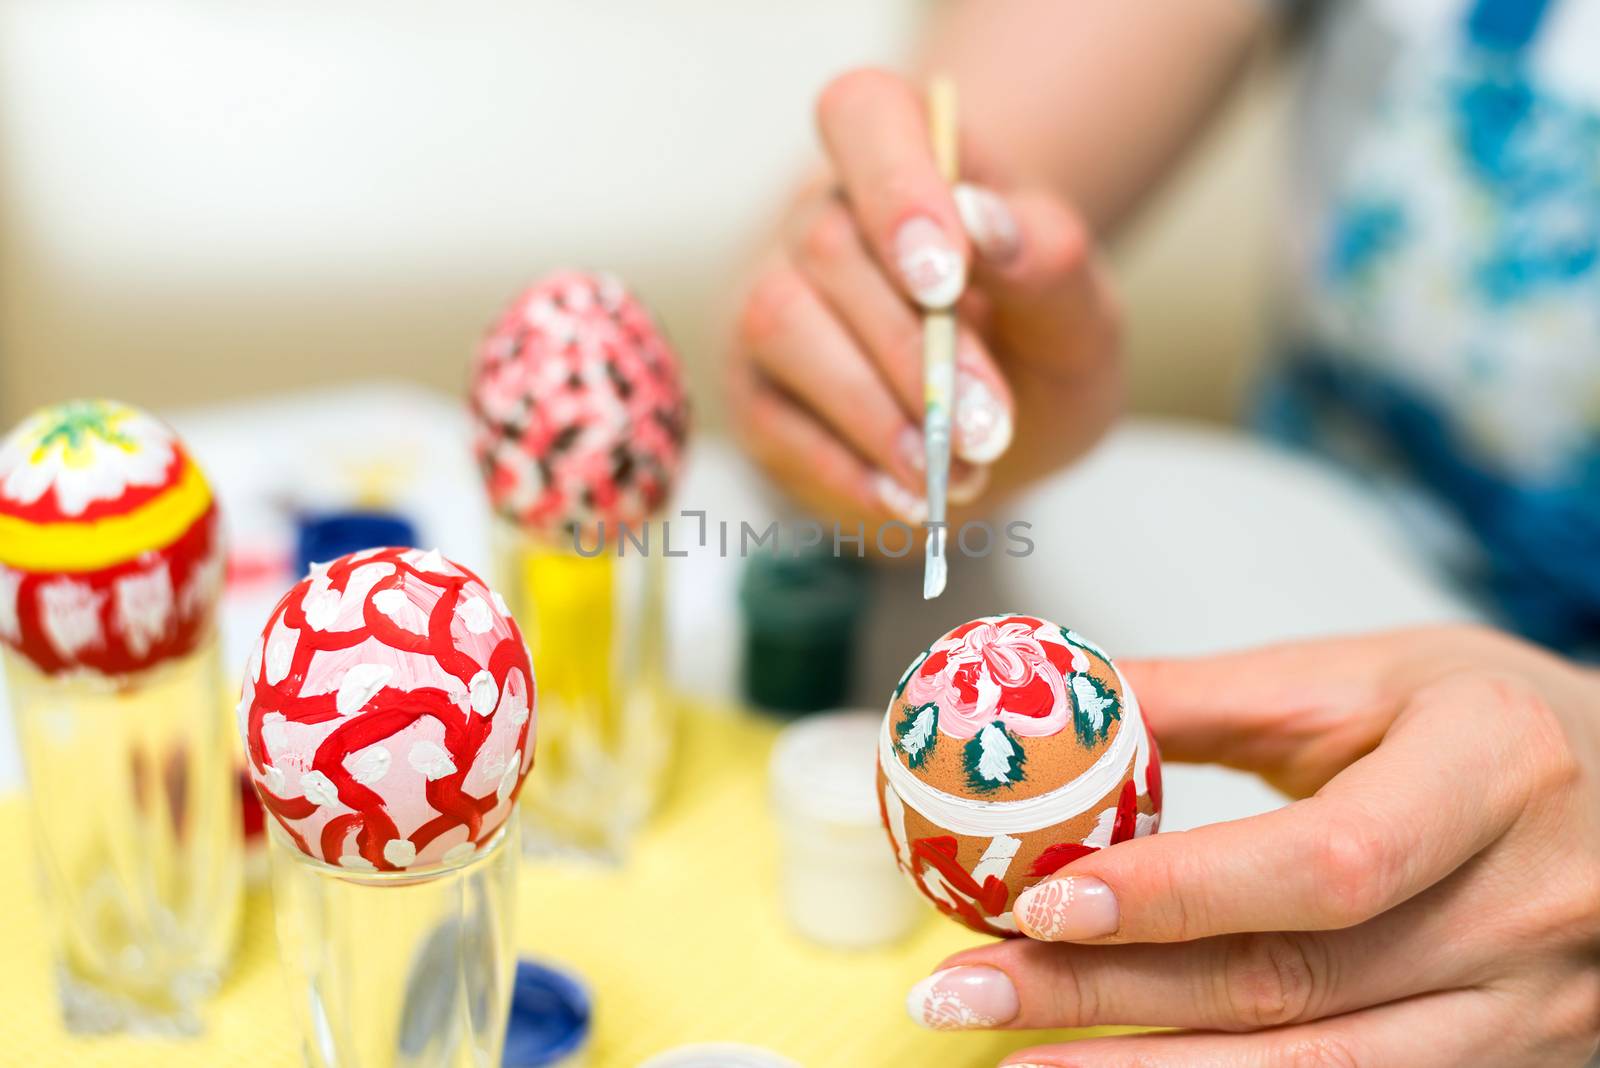 Woman paints the Easter eggs with brush by olgavolodina